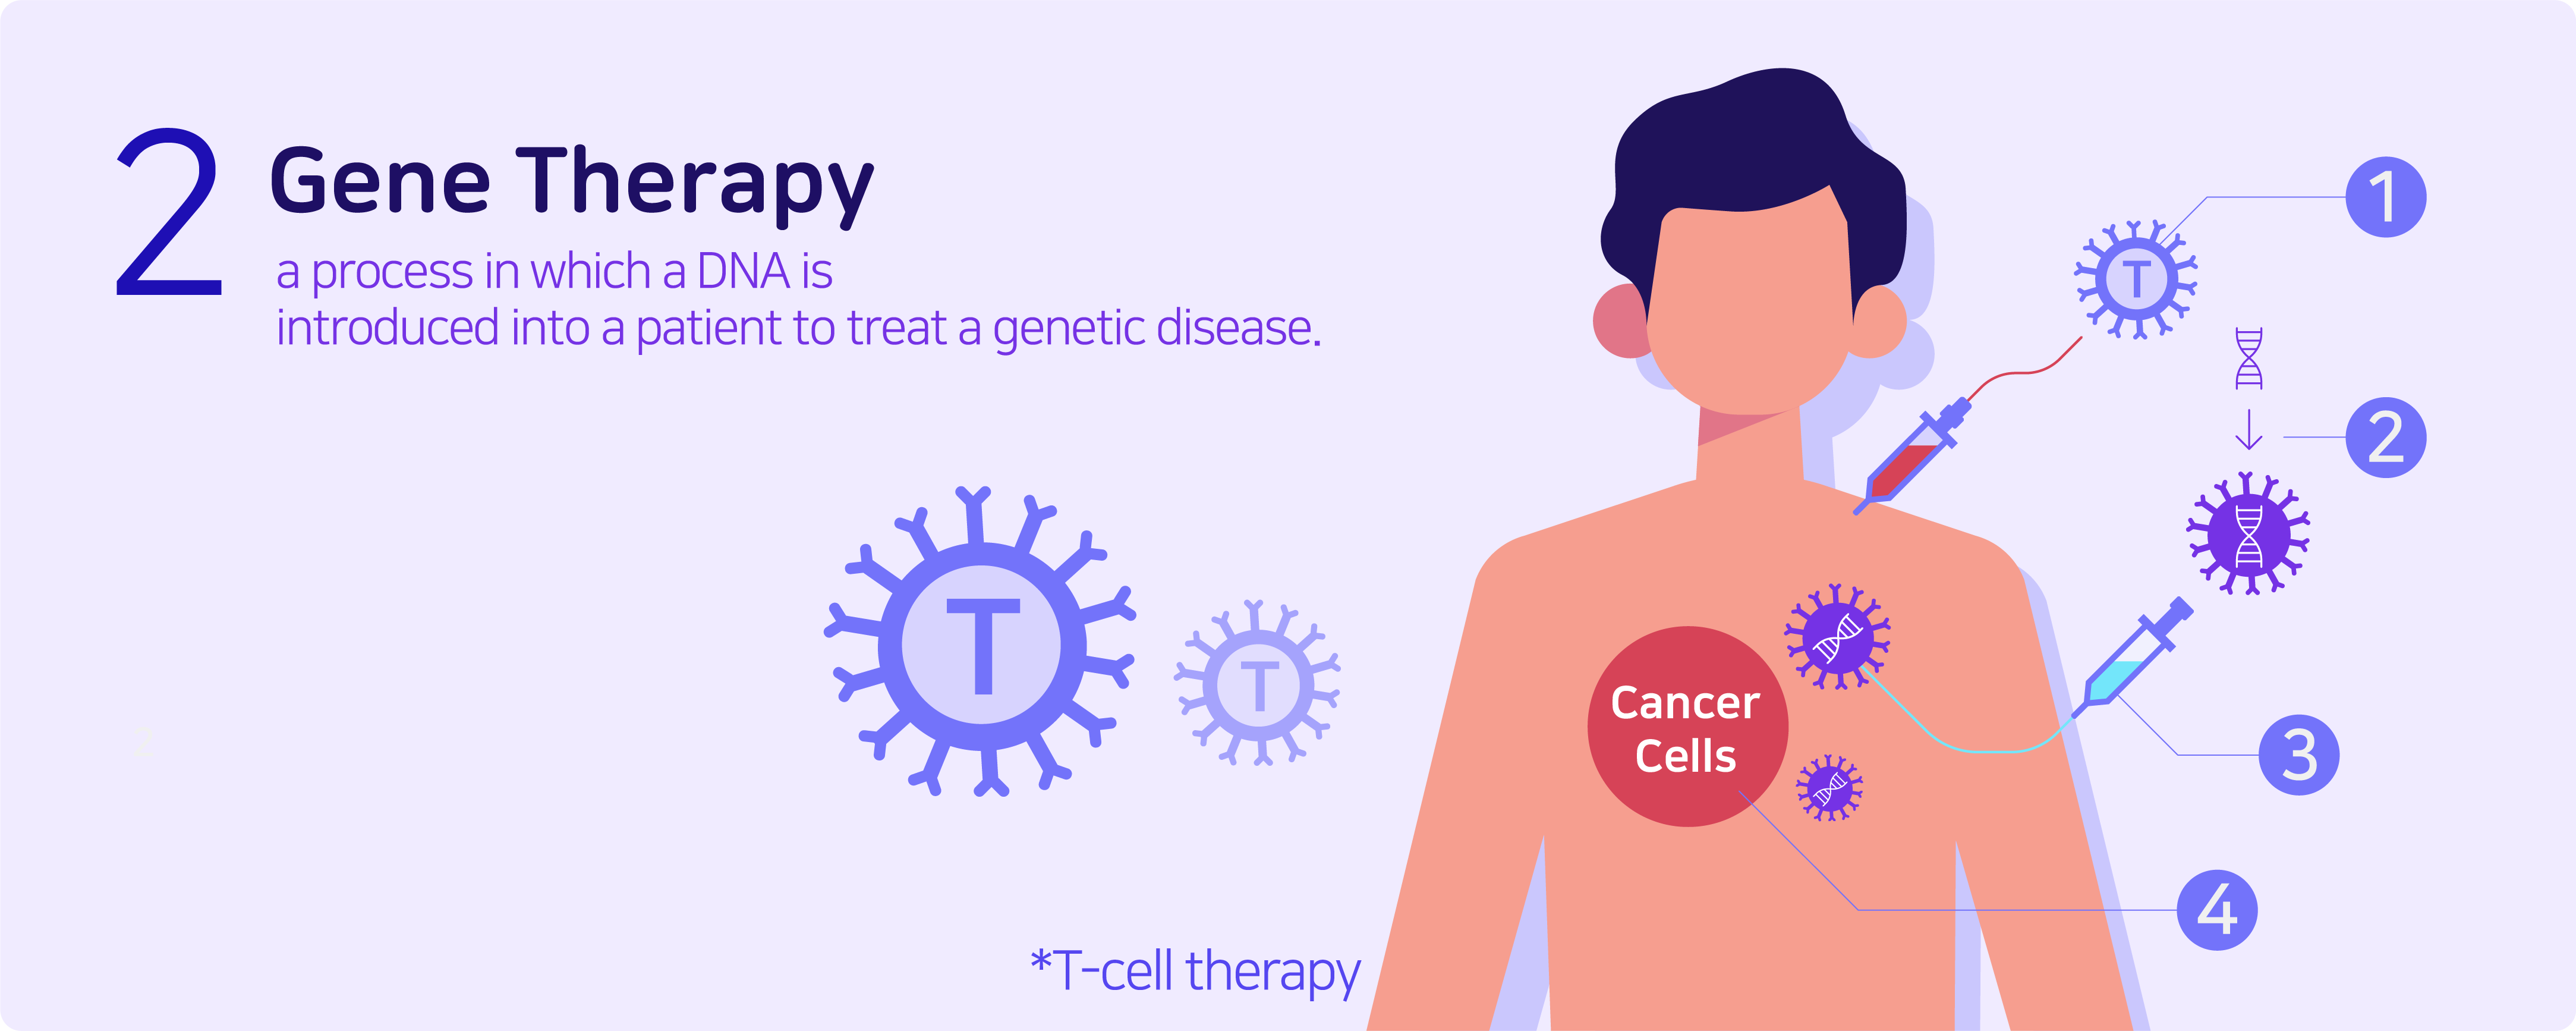 2. Gene Therapy - a process in which a DNA is introduced into a patient to treat a genetic disease.